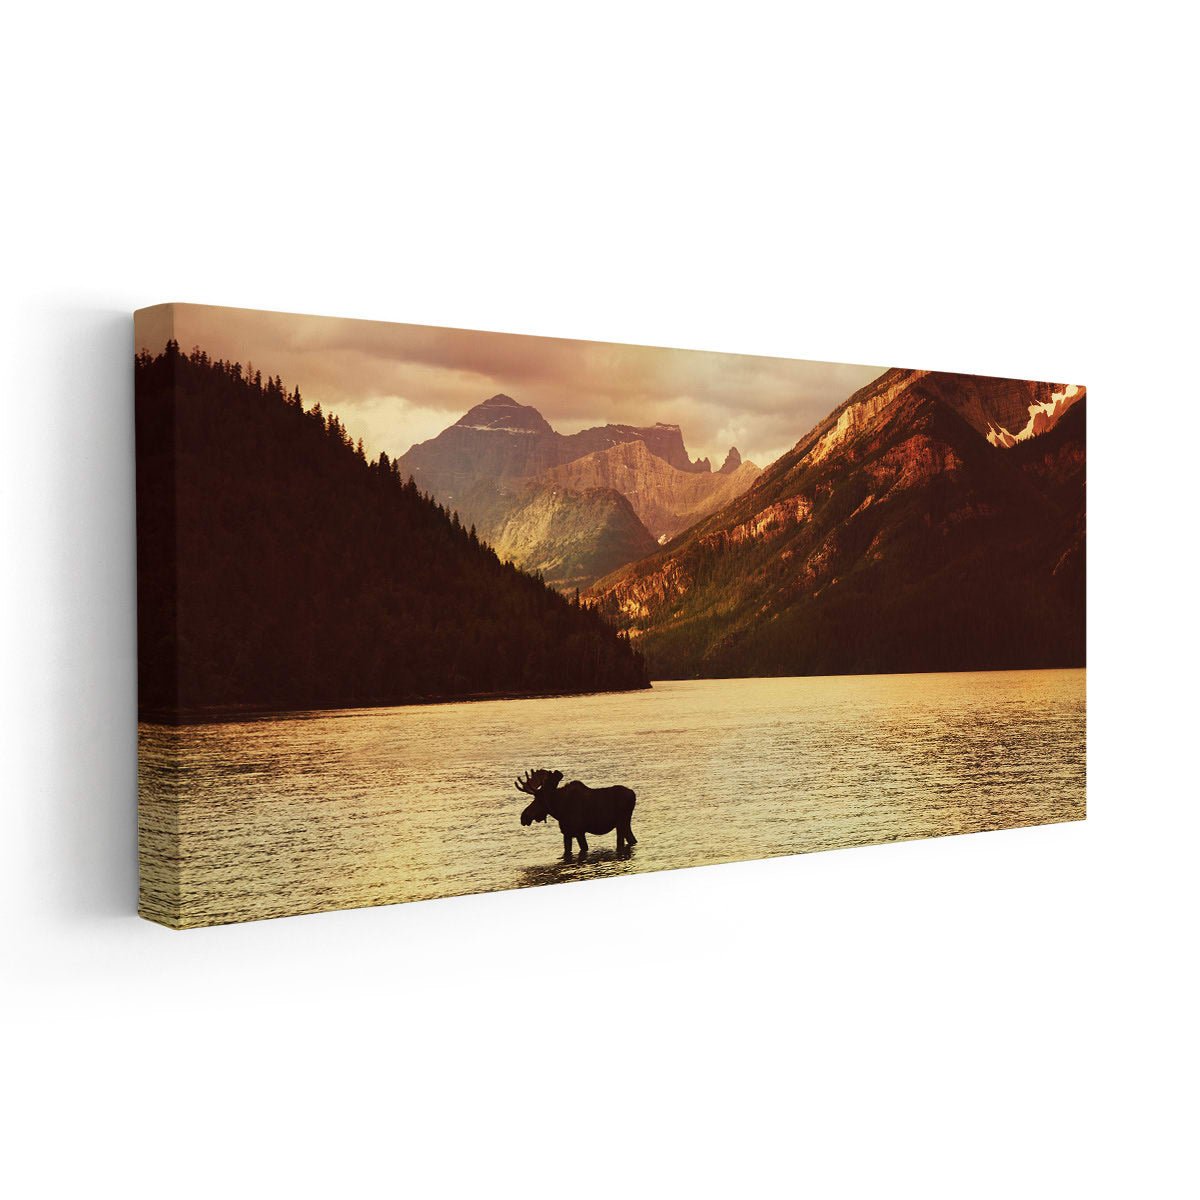 Moose In The Water Wall Art Canvas-Stunning Canvas Prints